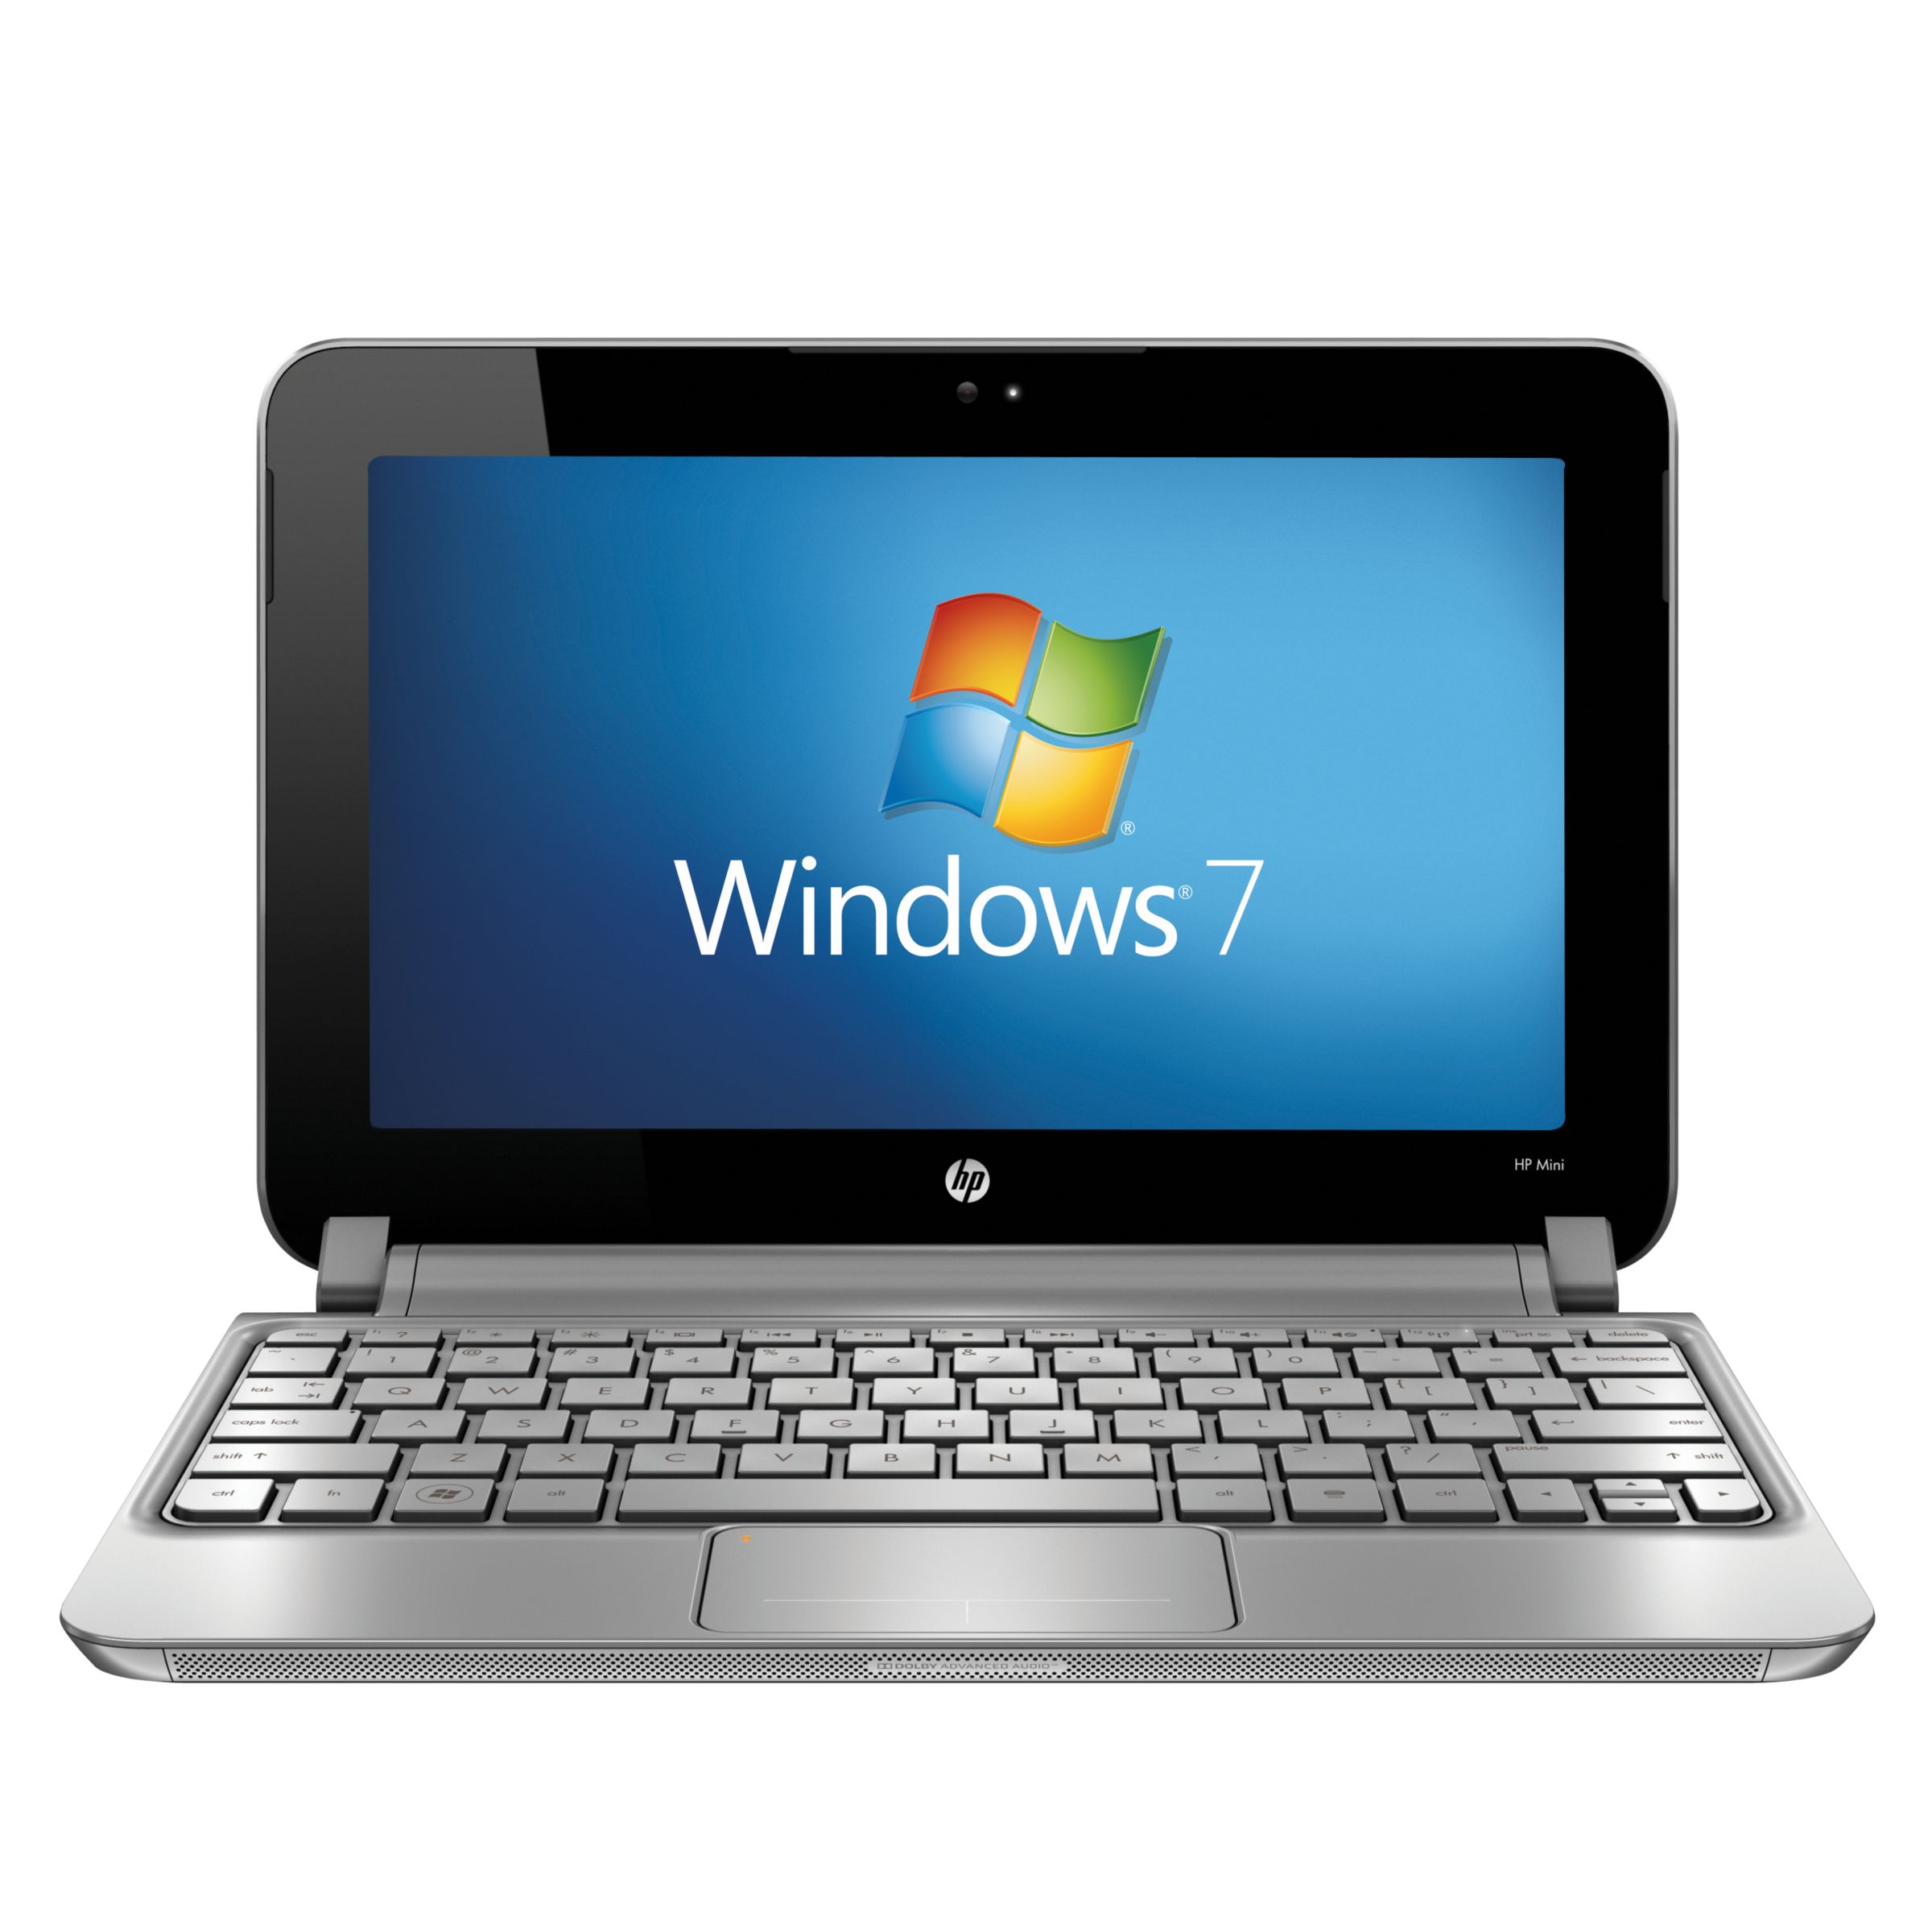 HP Mini 210-2004SA Netbook, 1.66GHz with 10.1 Inch Display, Red at John Lewis